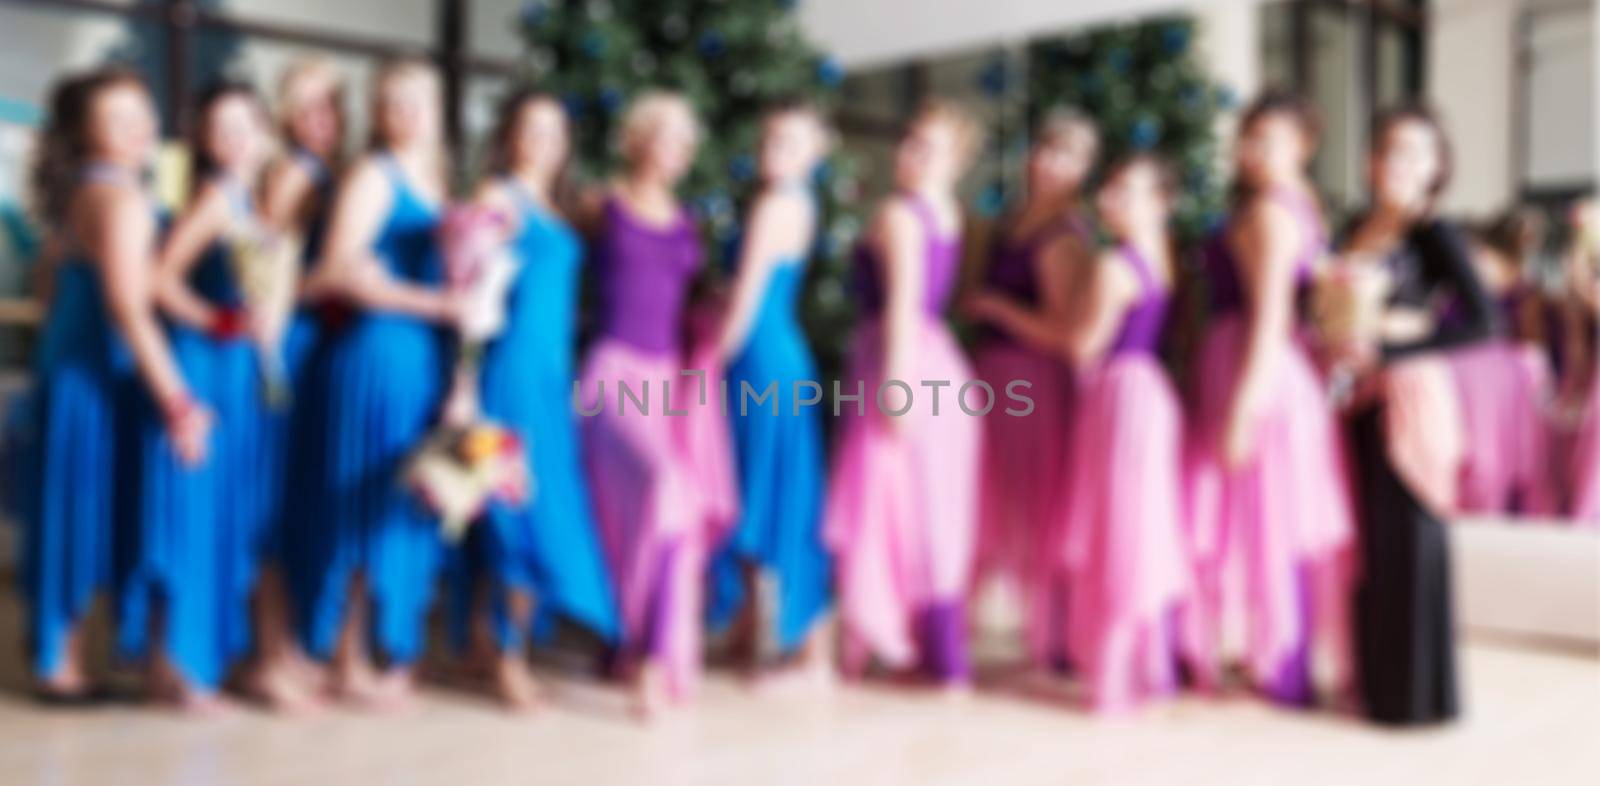 Dance class for women at fitness centre abstract blur background